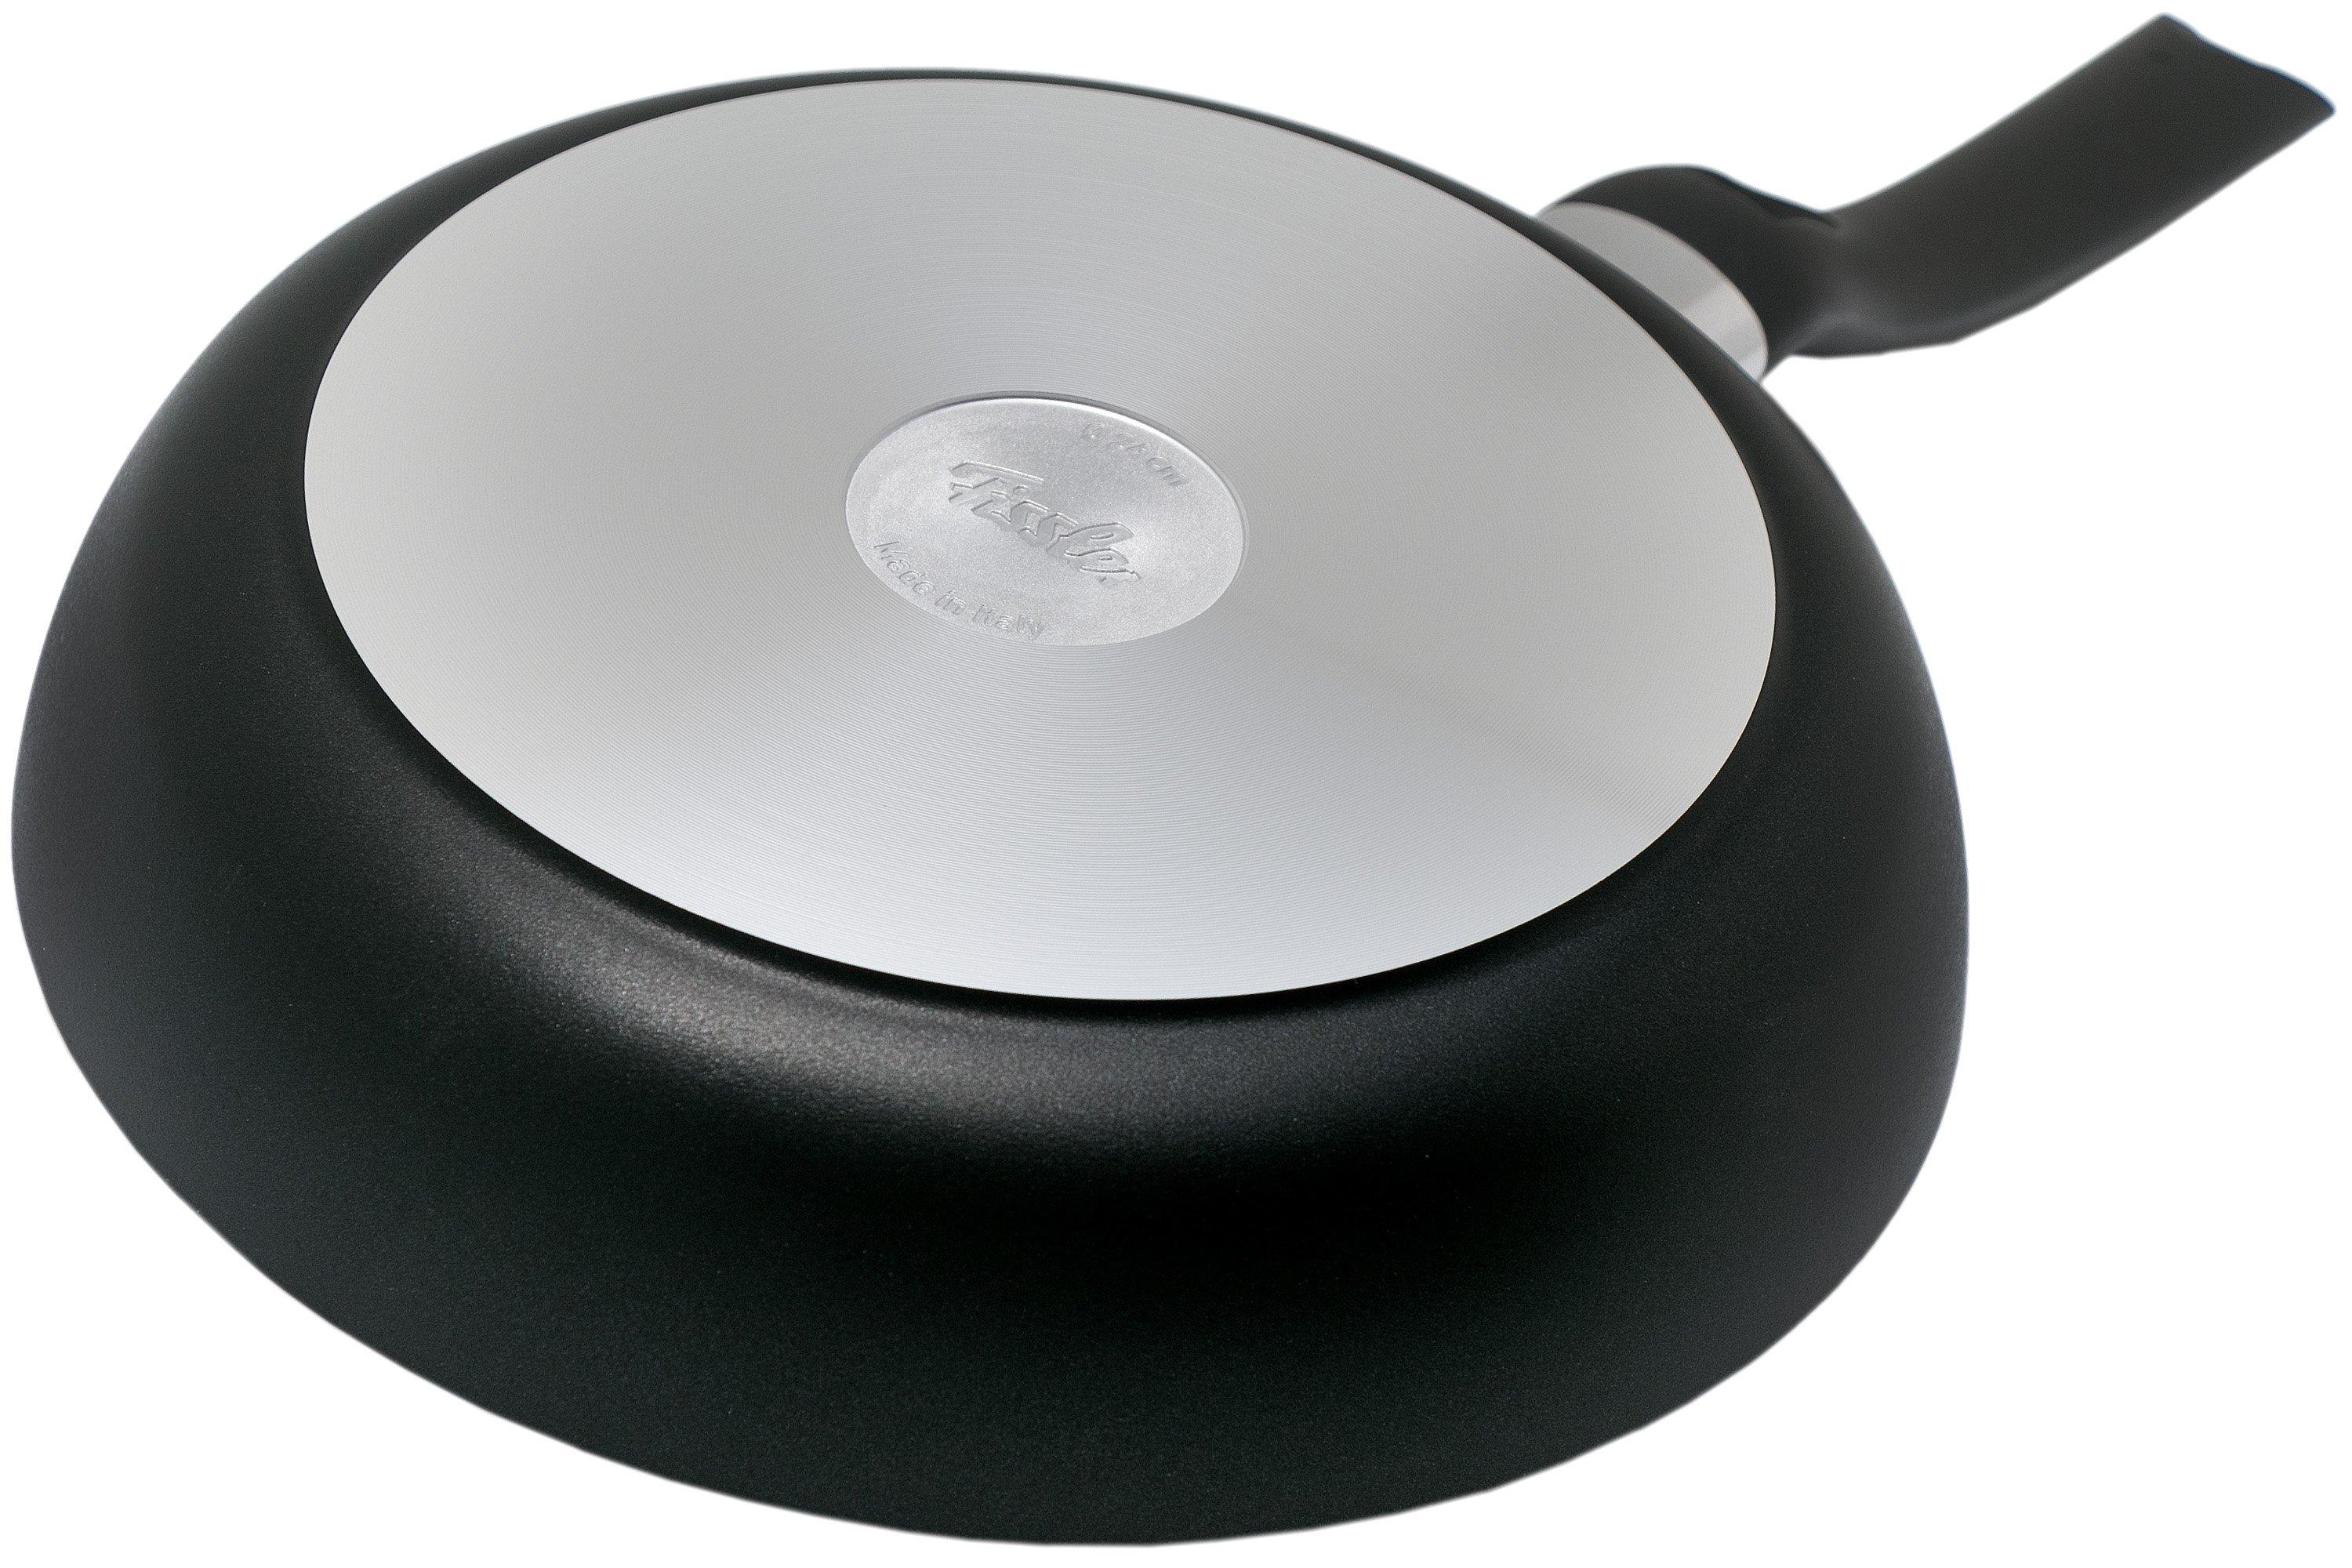 045-300-24-100, shopping at Fissler 24 Advantageously frying pan cm | Cenit